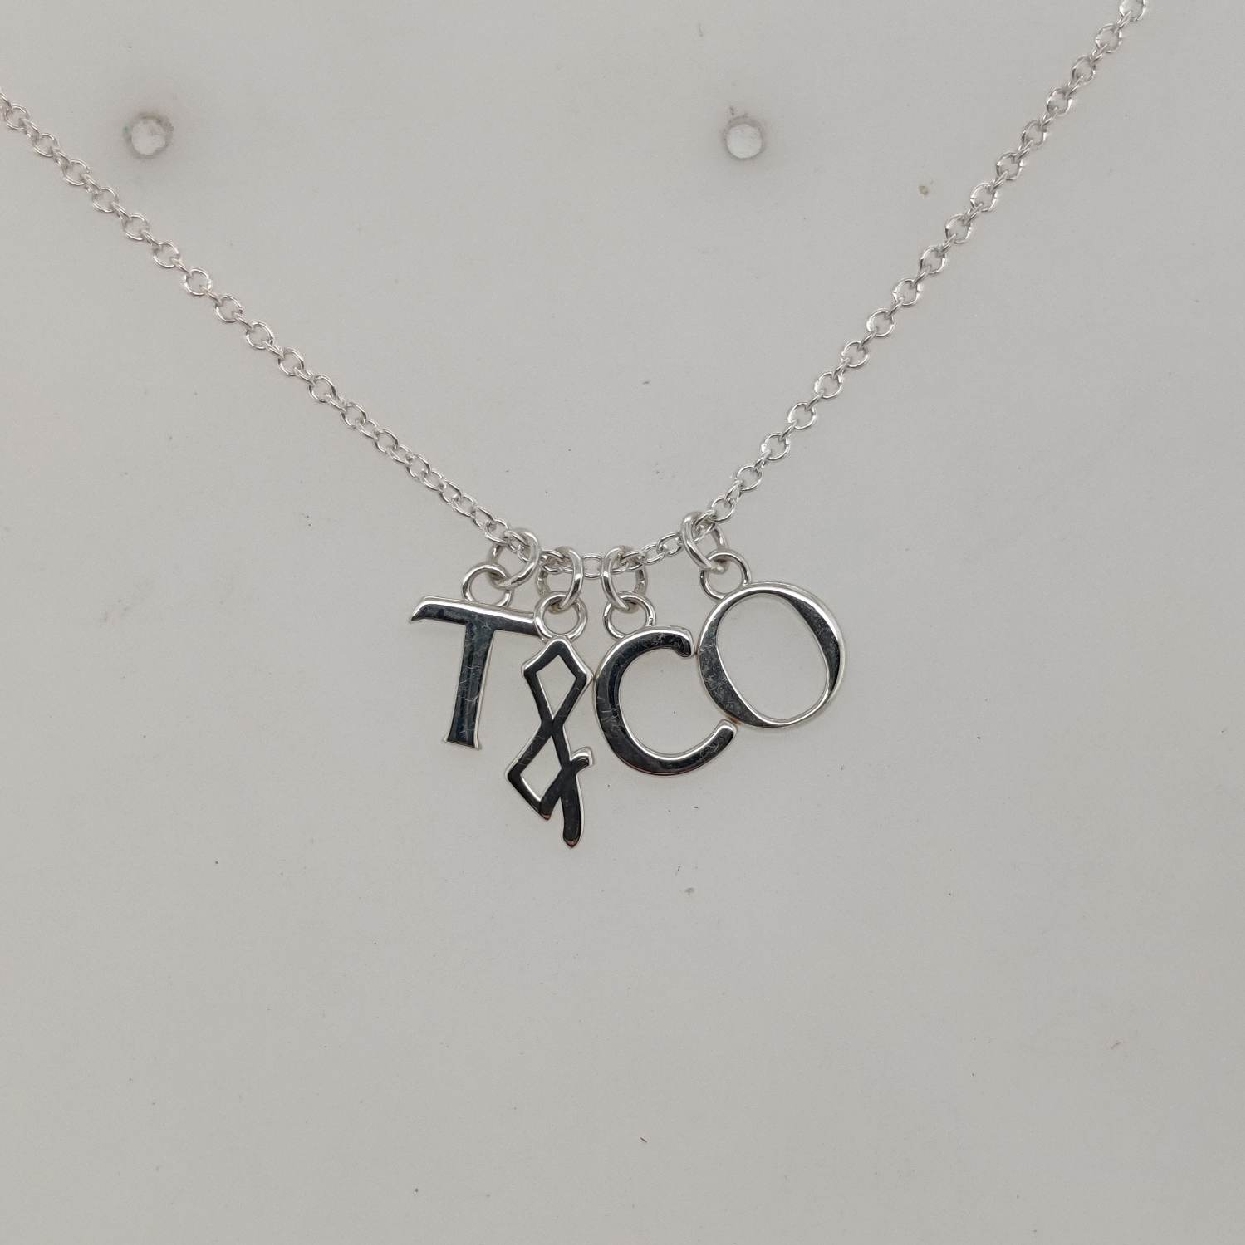 Sterling Silver Tiffany & Co. Charm Necklace; 18-20 inch

Comes with Box and Pouch